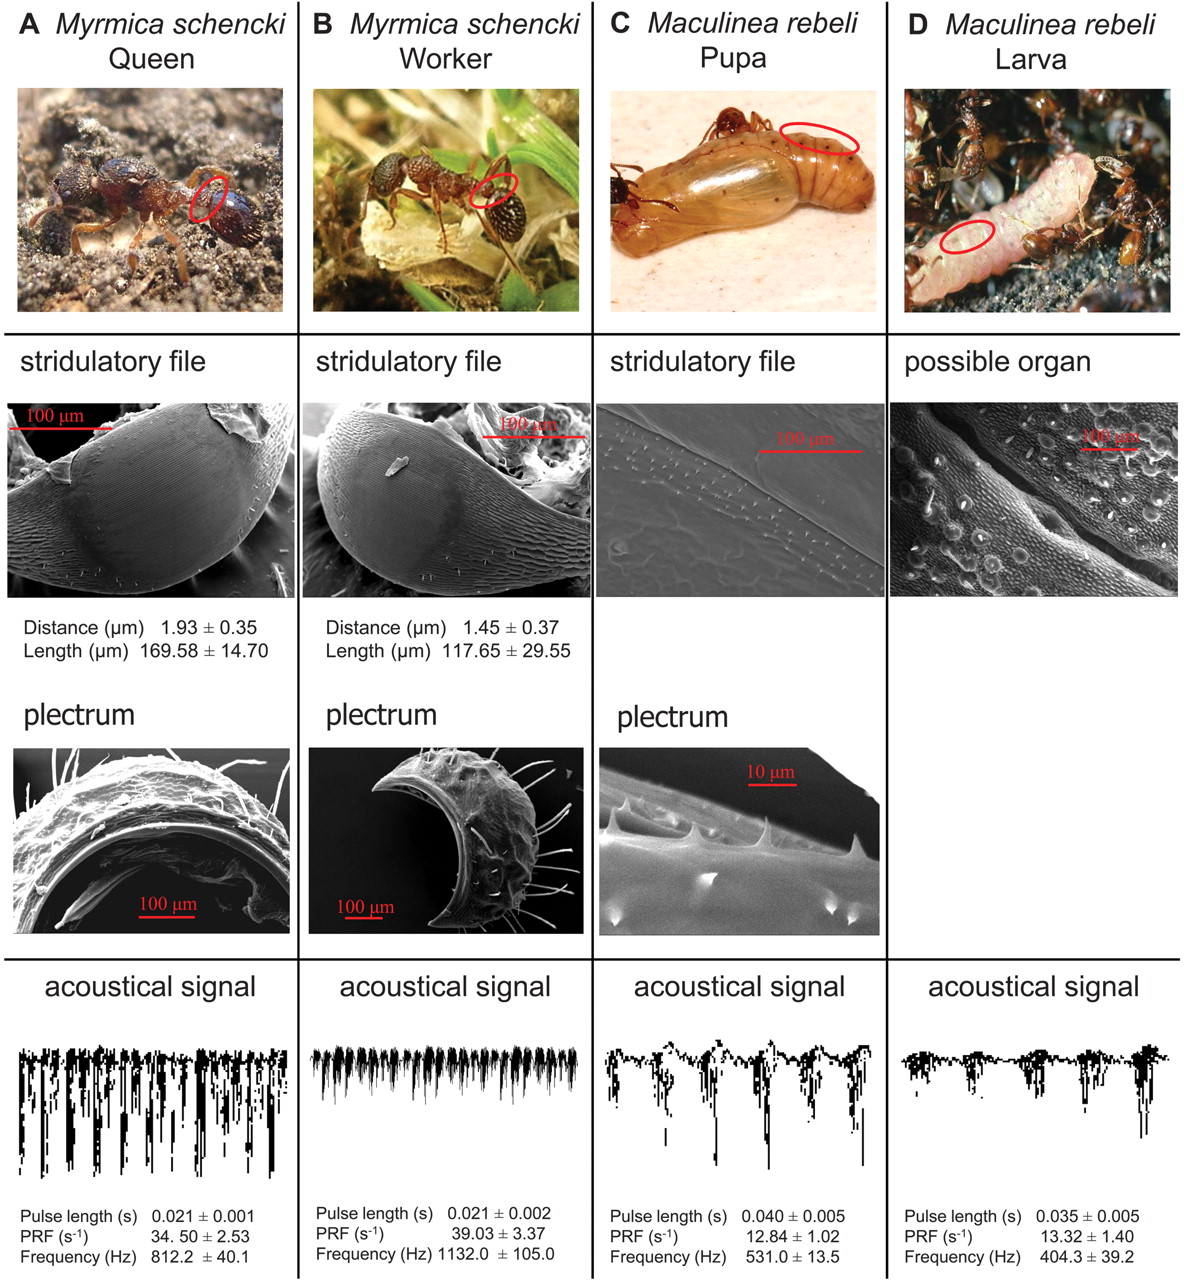 images of the various stridulation organs for Myrmica and Maculinea